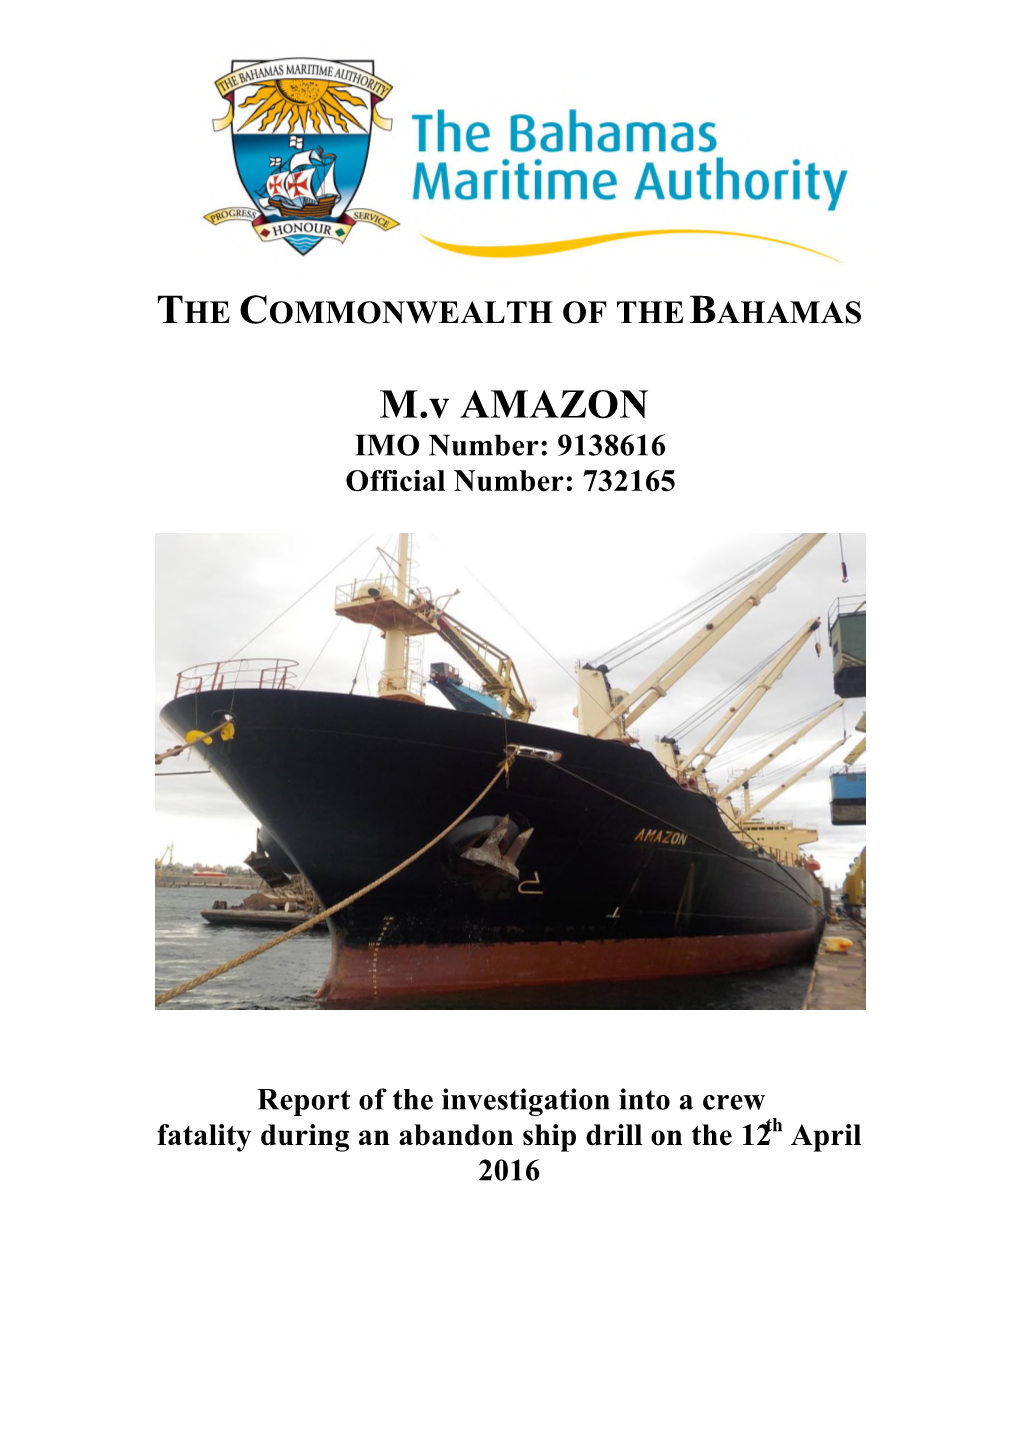 BMA Investigation Report: Crew Fatality Onboard the Amazon